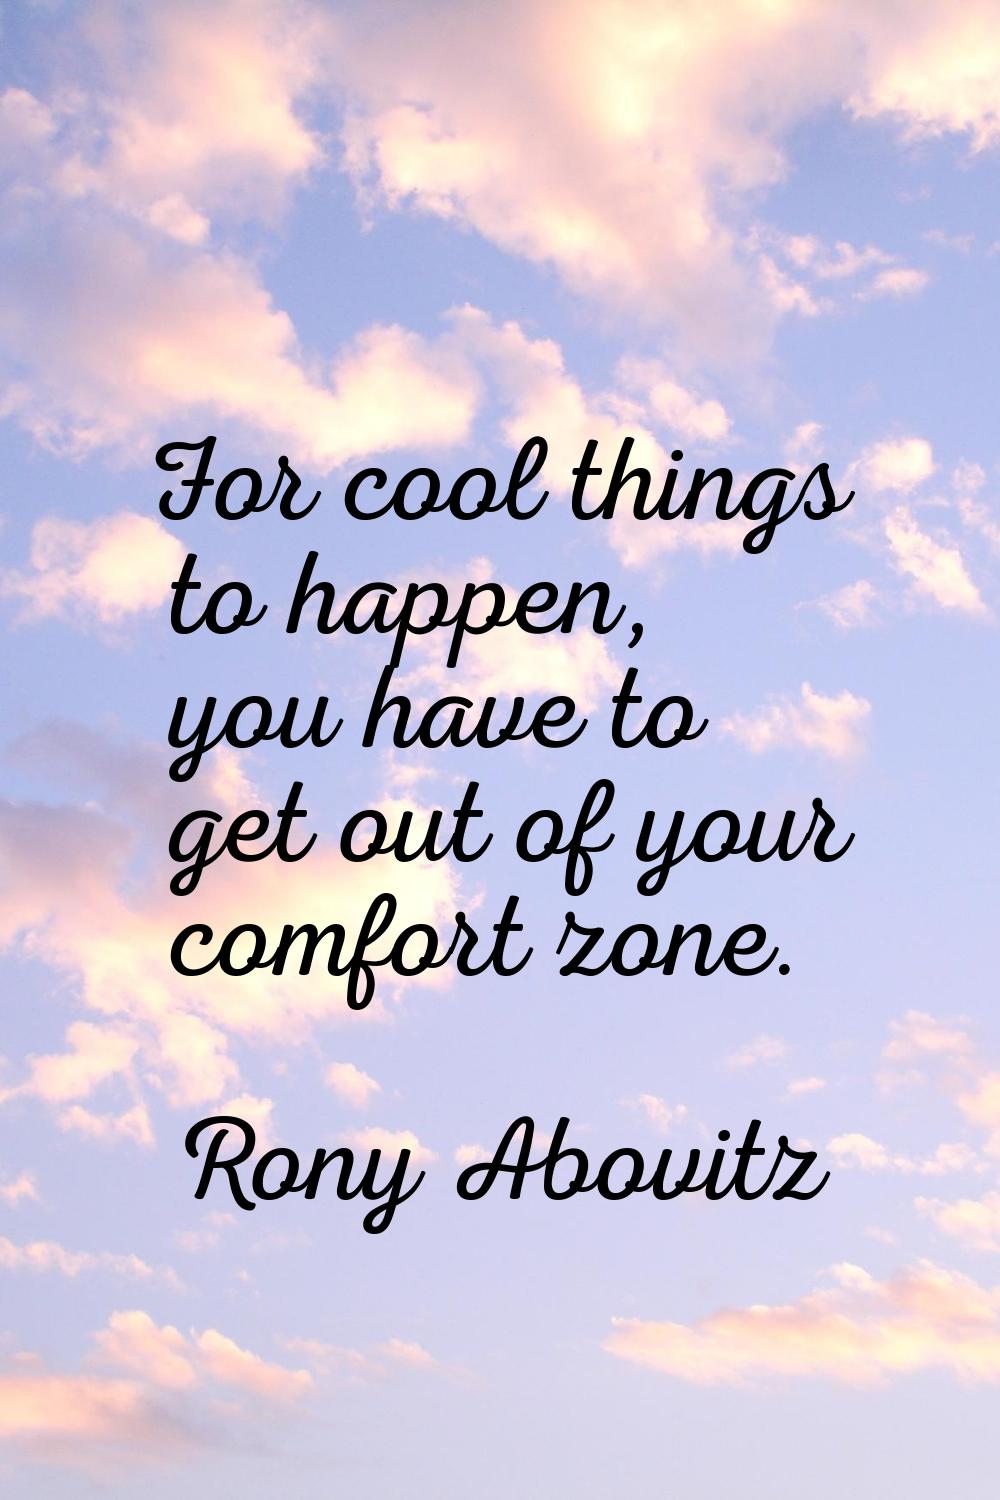 For cool things to happen, you have to get out of your comfort zone.